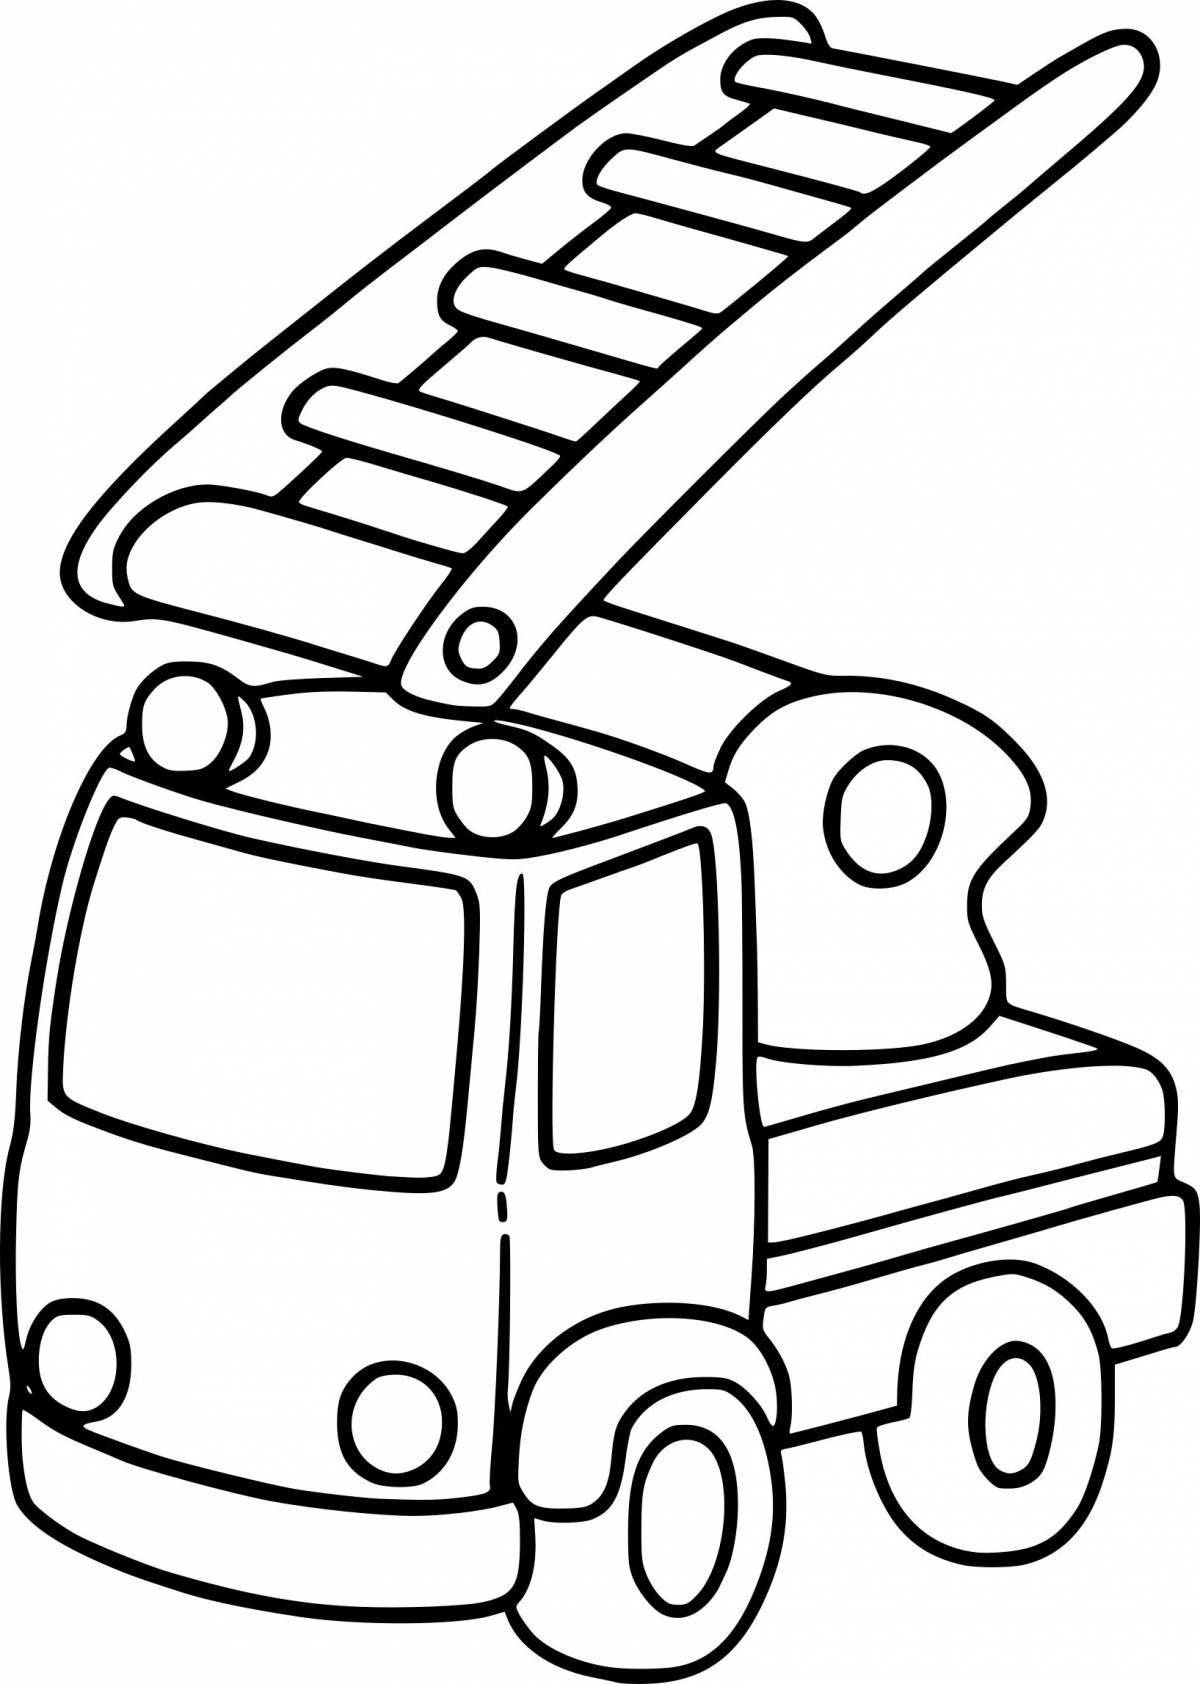 Exciting car coloring pages for 3 year olds